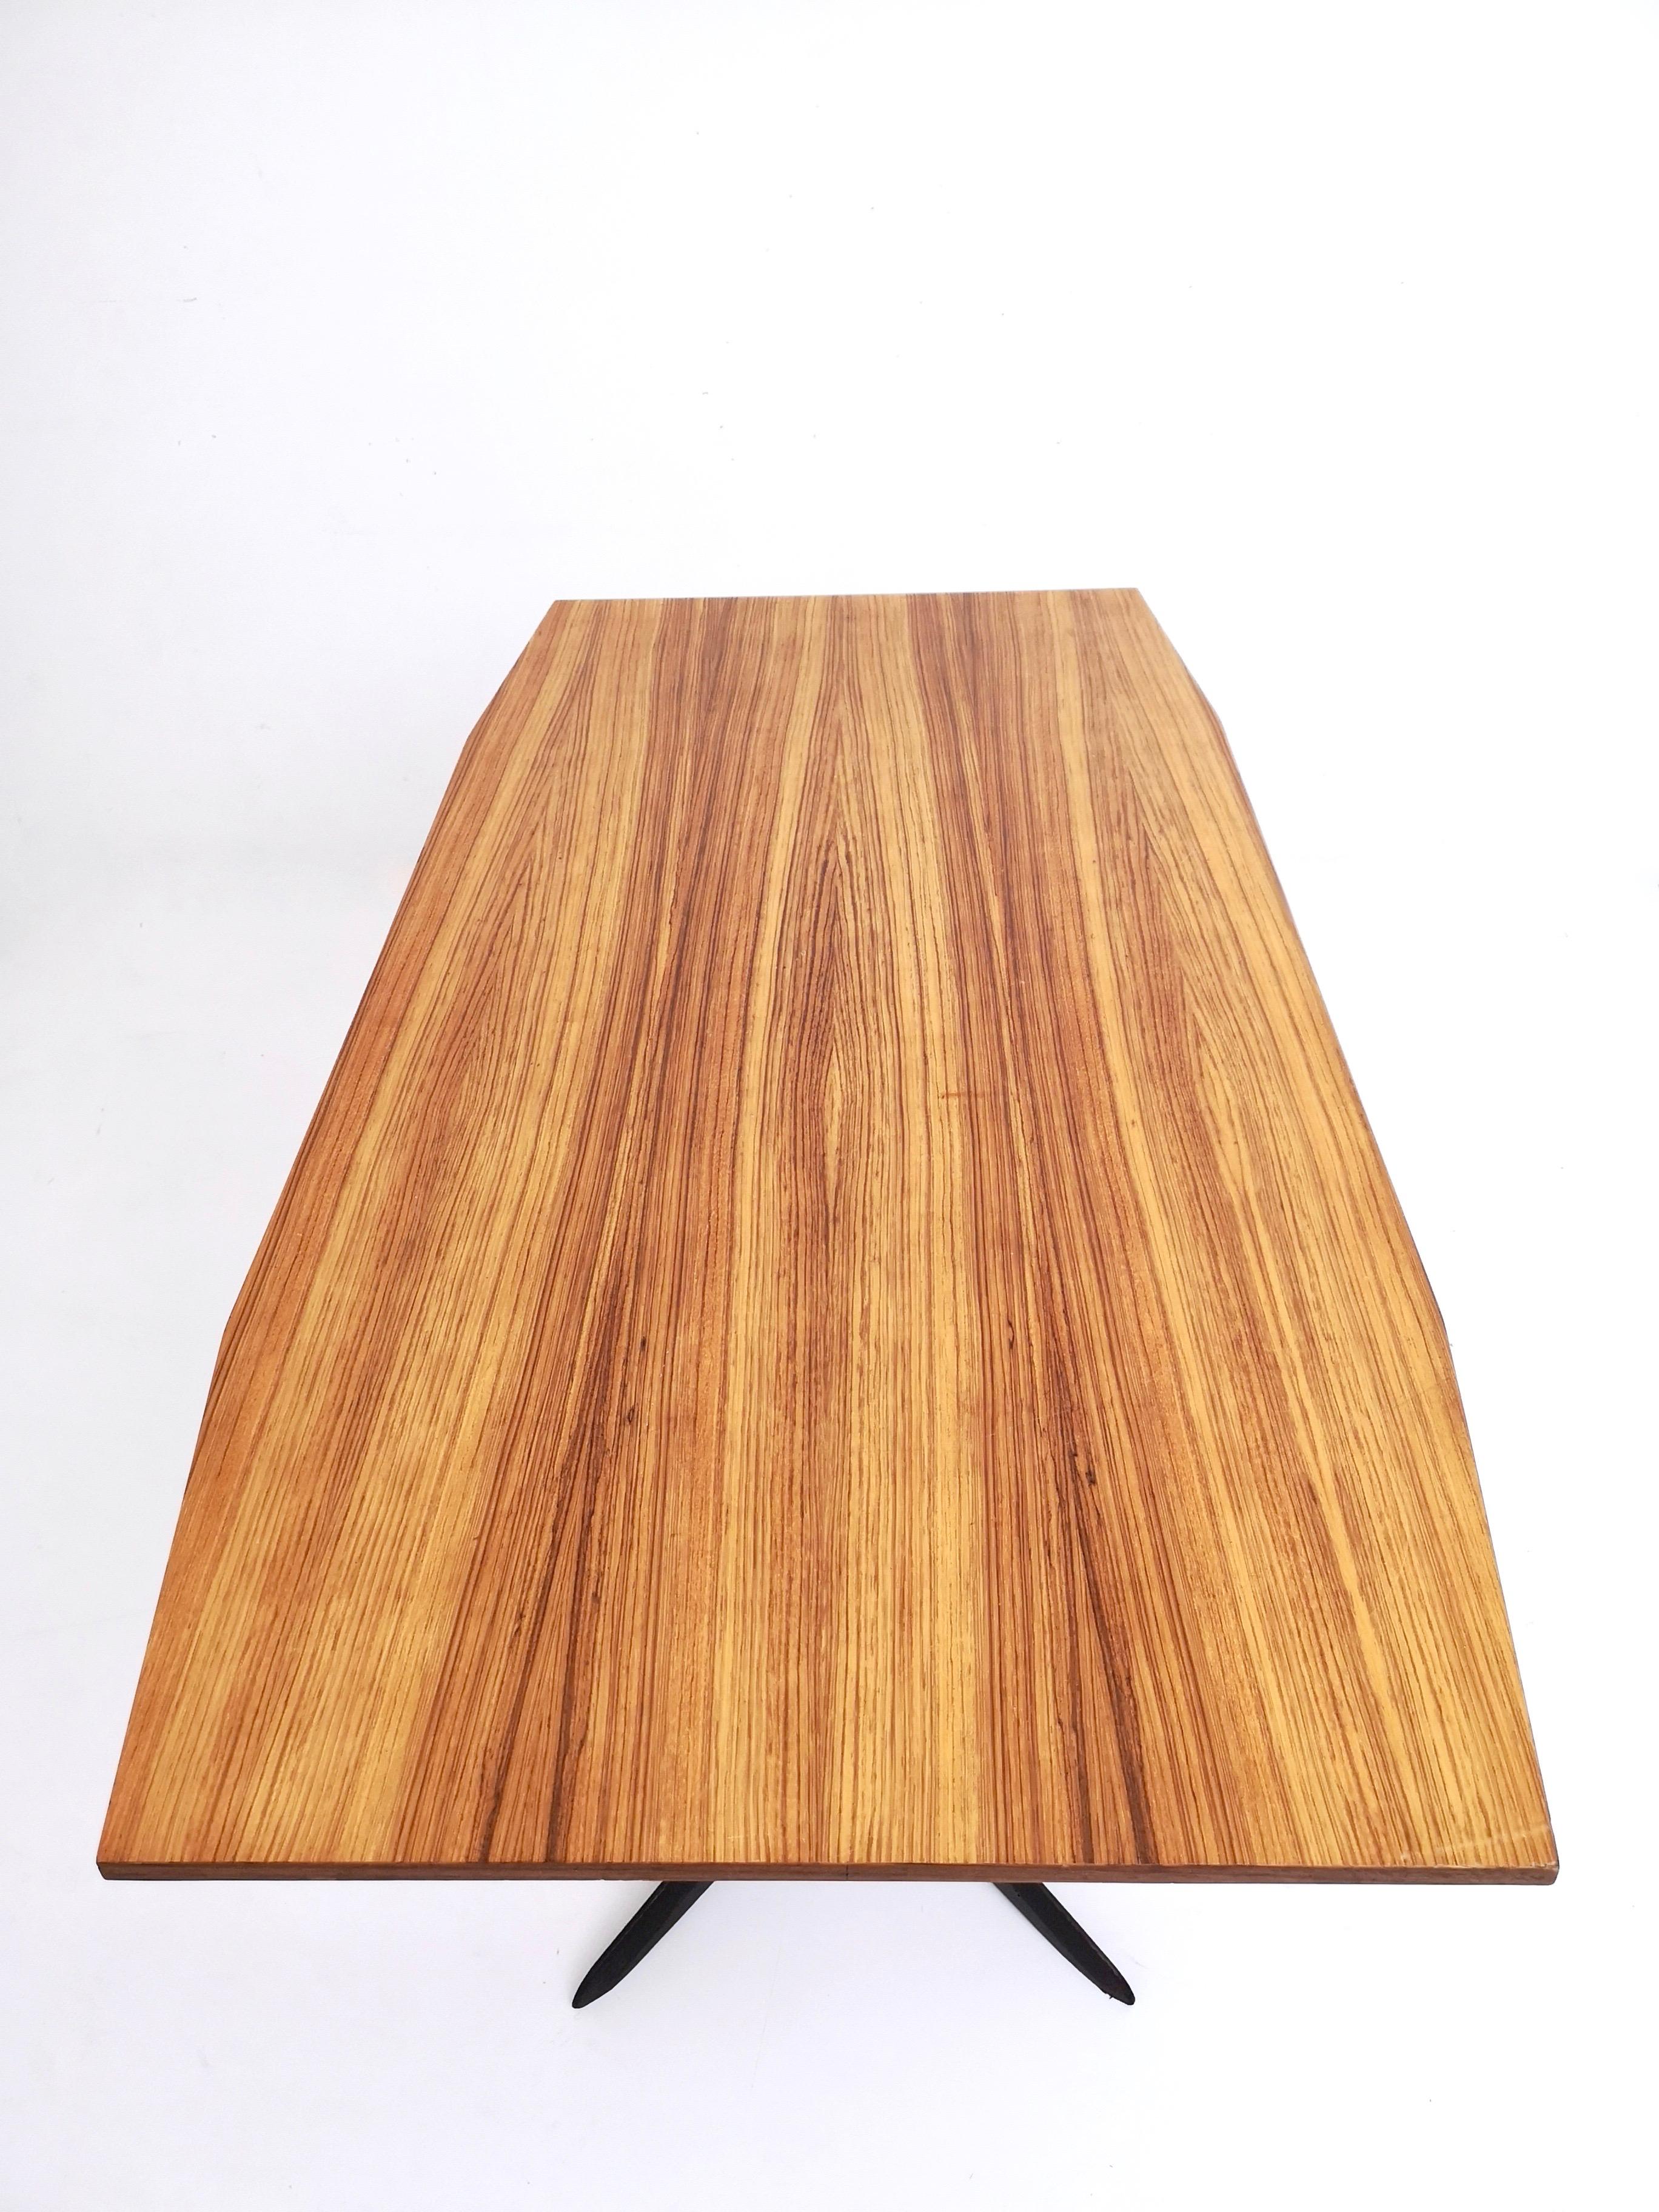 Mid-20th Century Vintage Dining Table with a Zebra Wood Top and an Ebonized Wood Frame, Italy For Sale